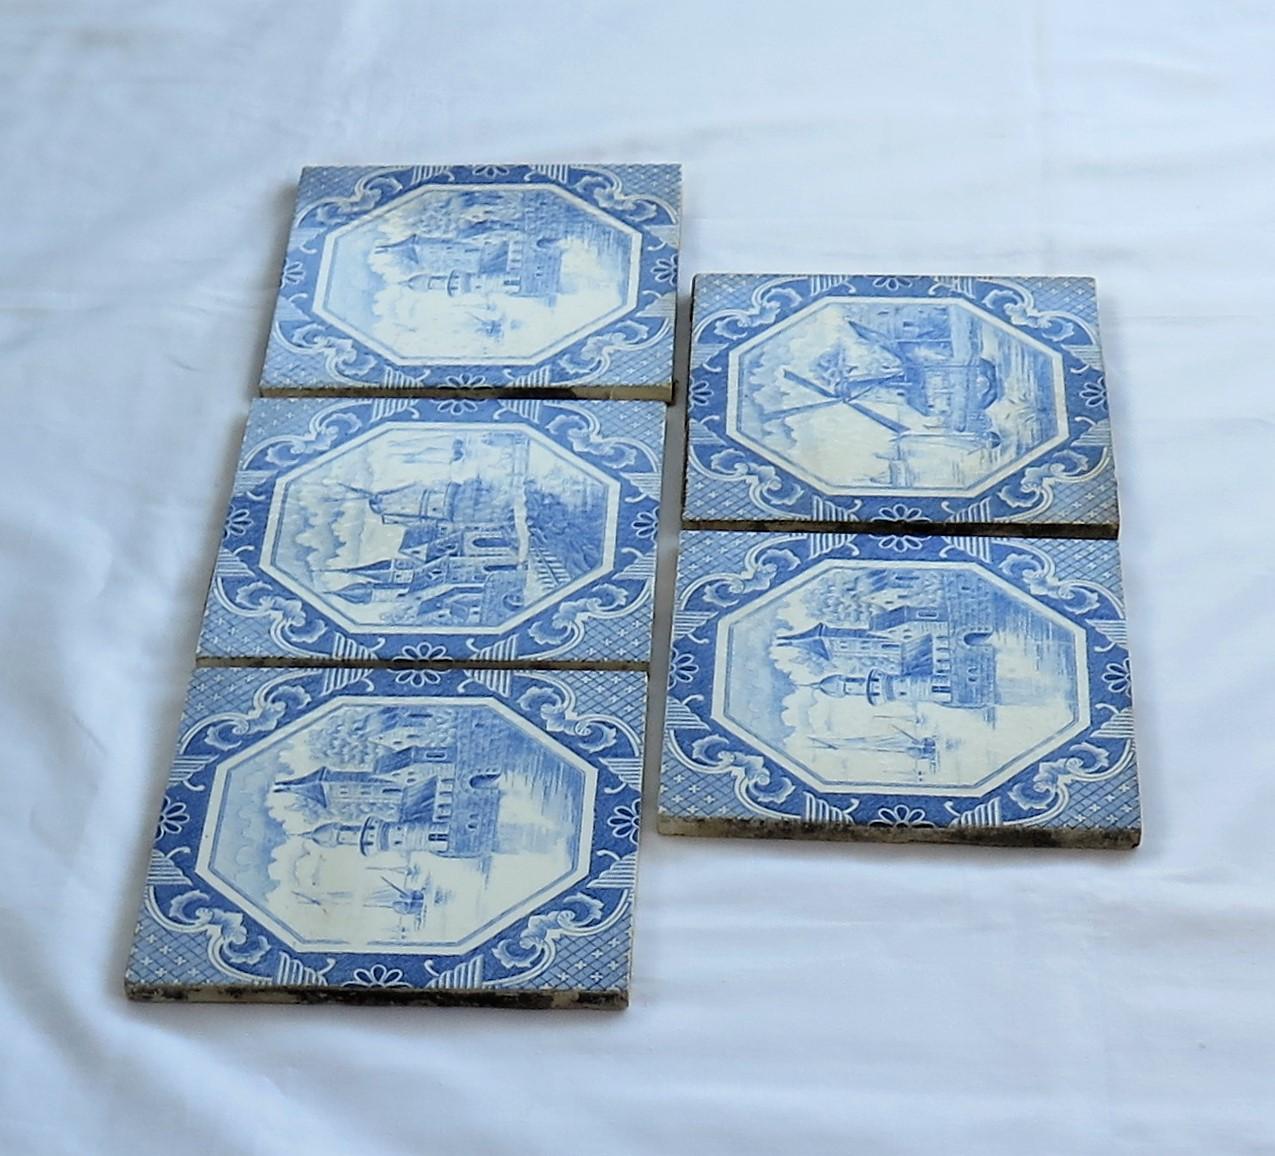 Dutch Colonial Set of Five Ceramic Wall Tiles Delft Style Blue and White Pattern, circa 1920s